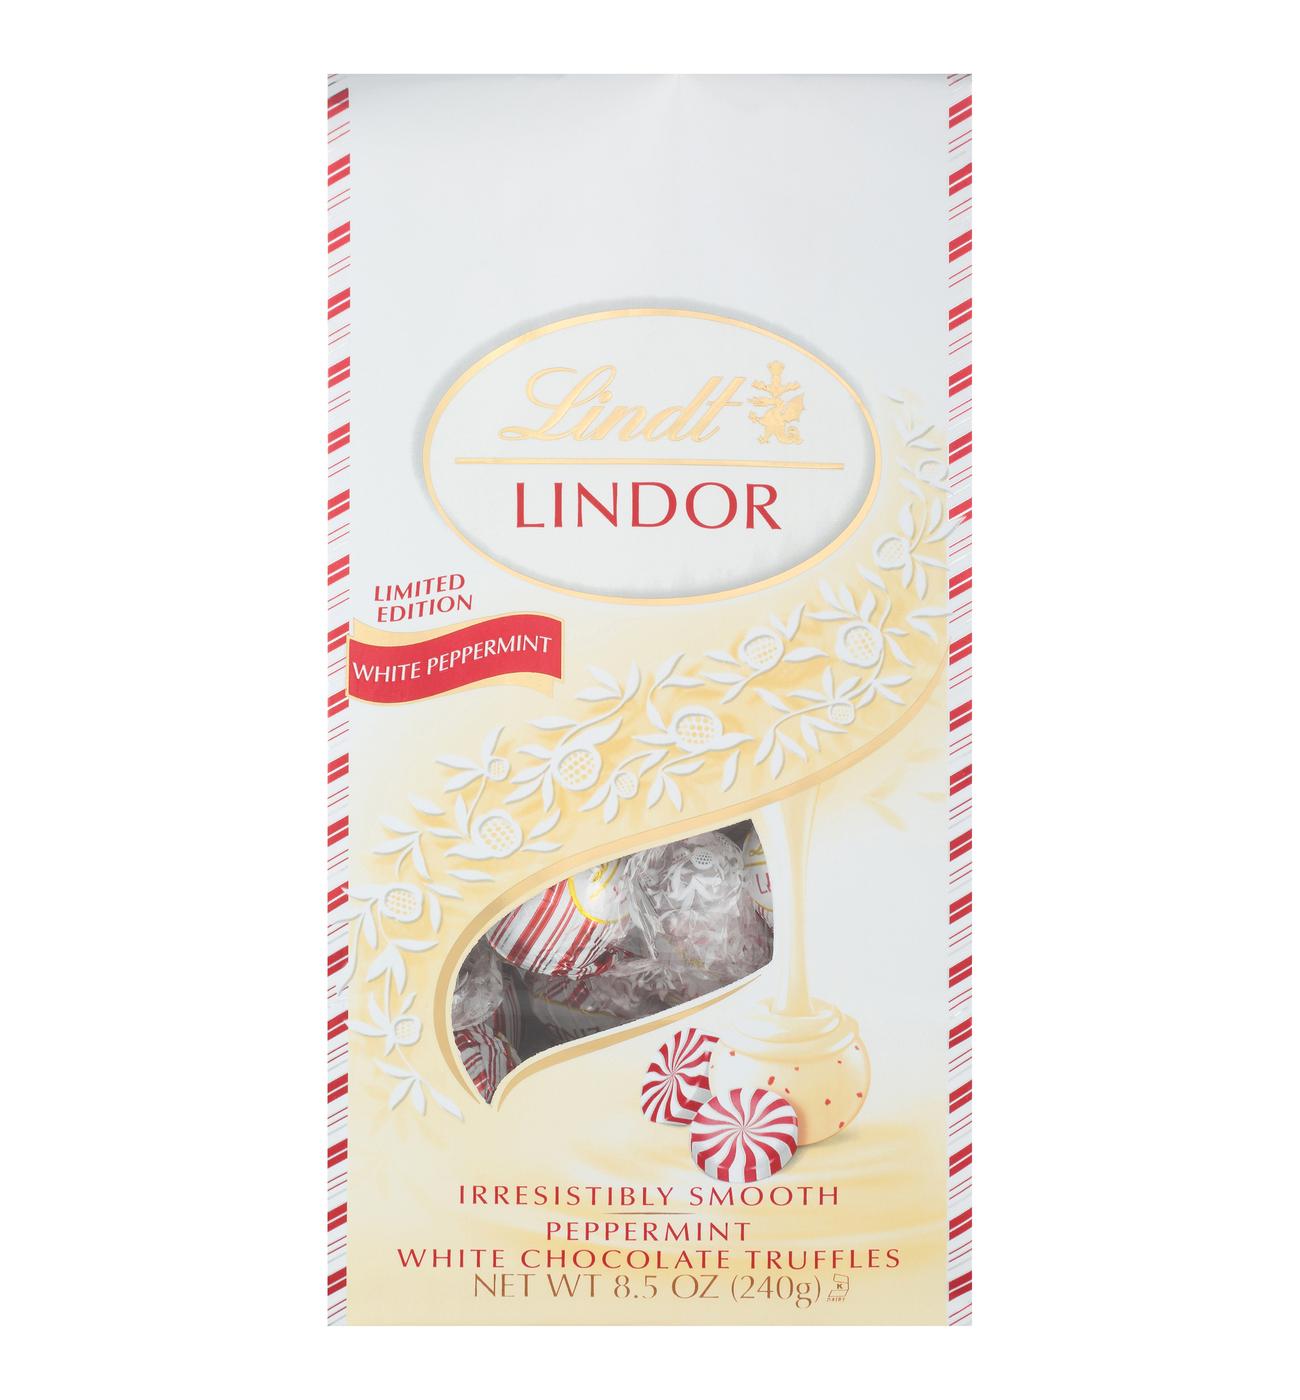 Lindt Lindor White Peppermint Chocolate Holiday Truffles; image 1 of 2